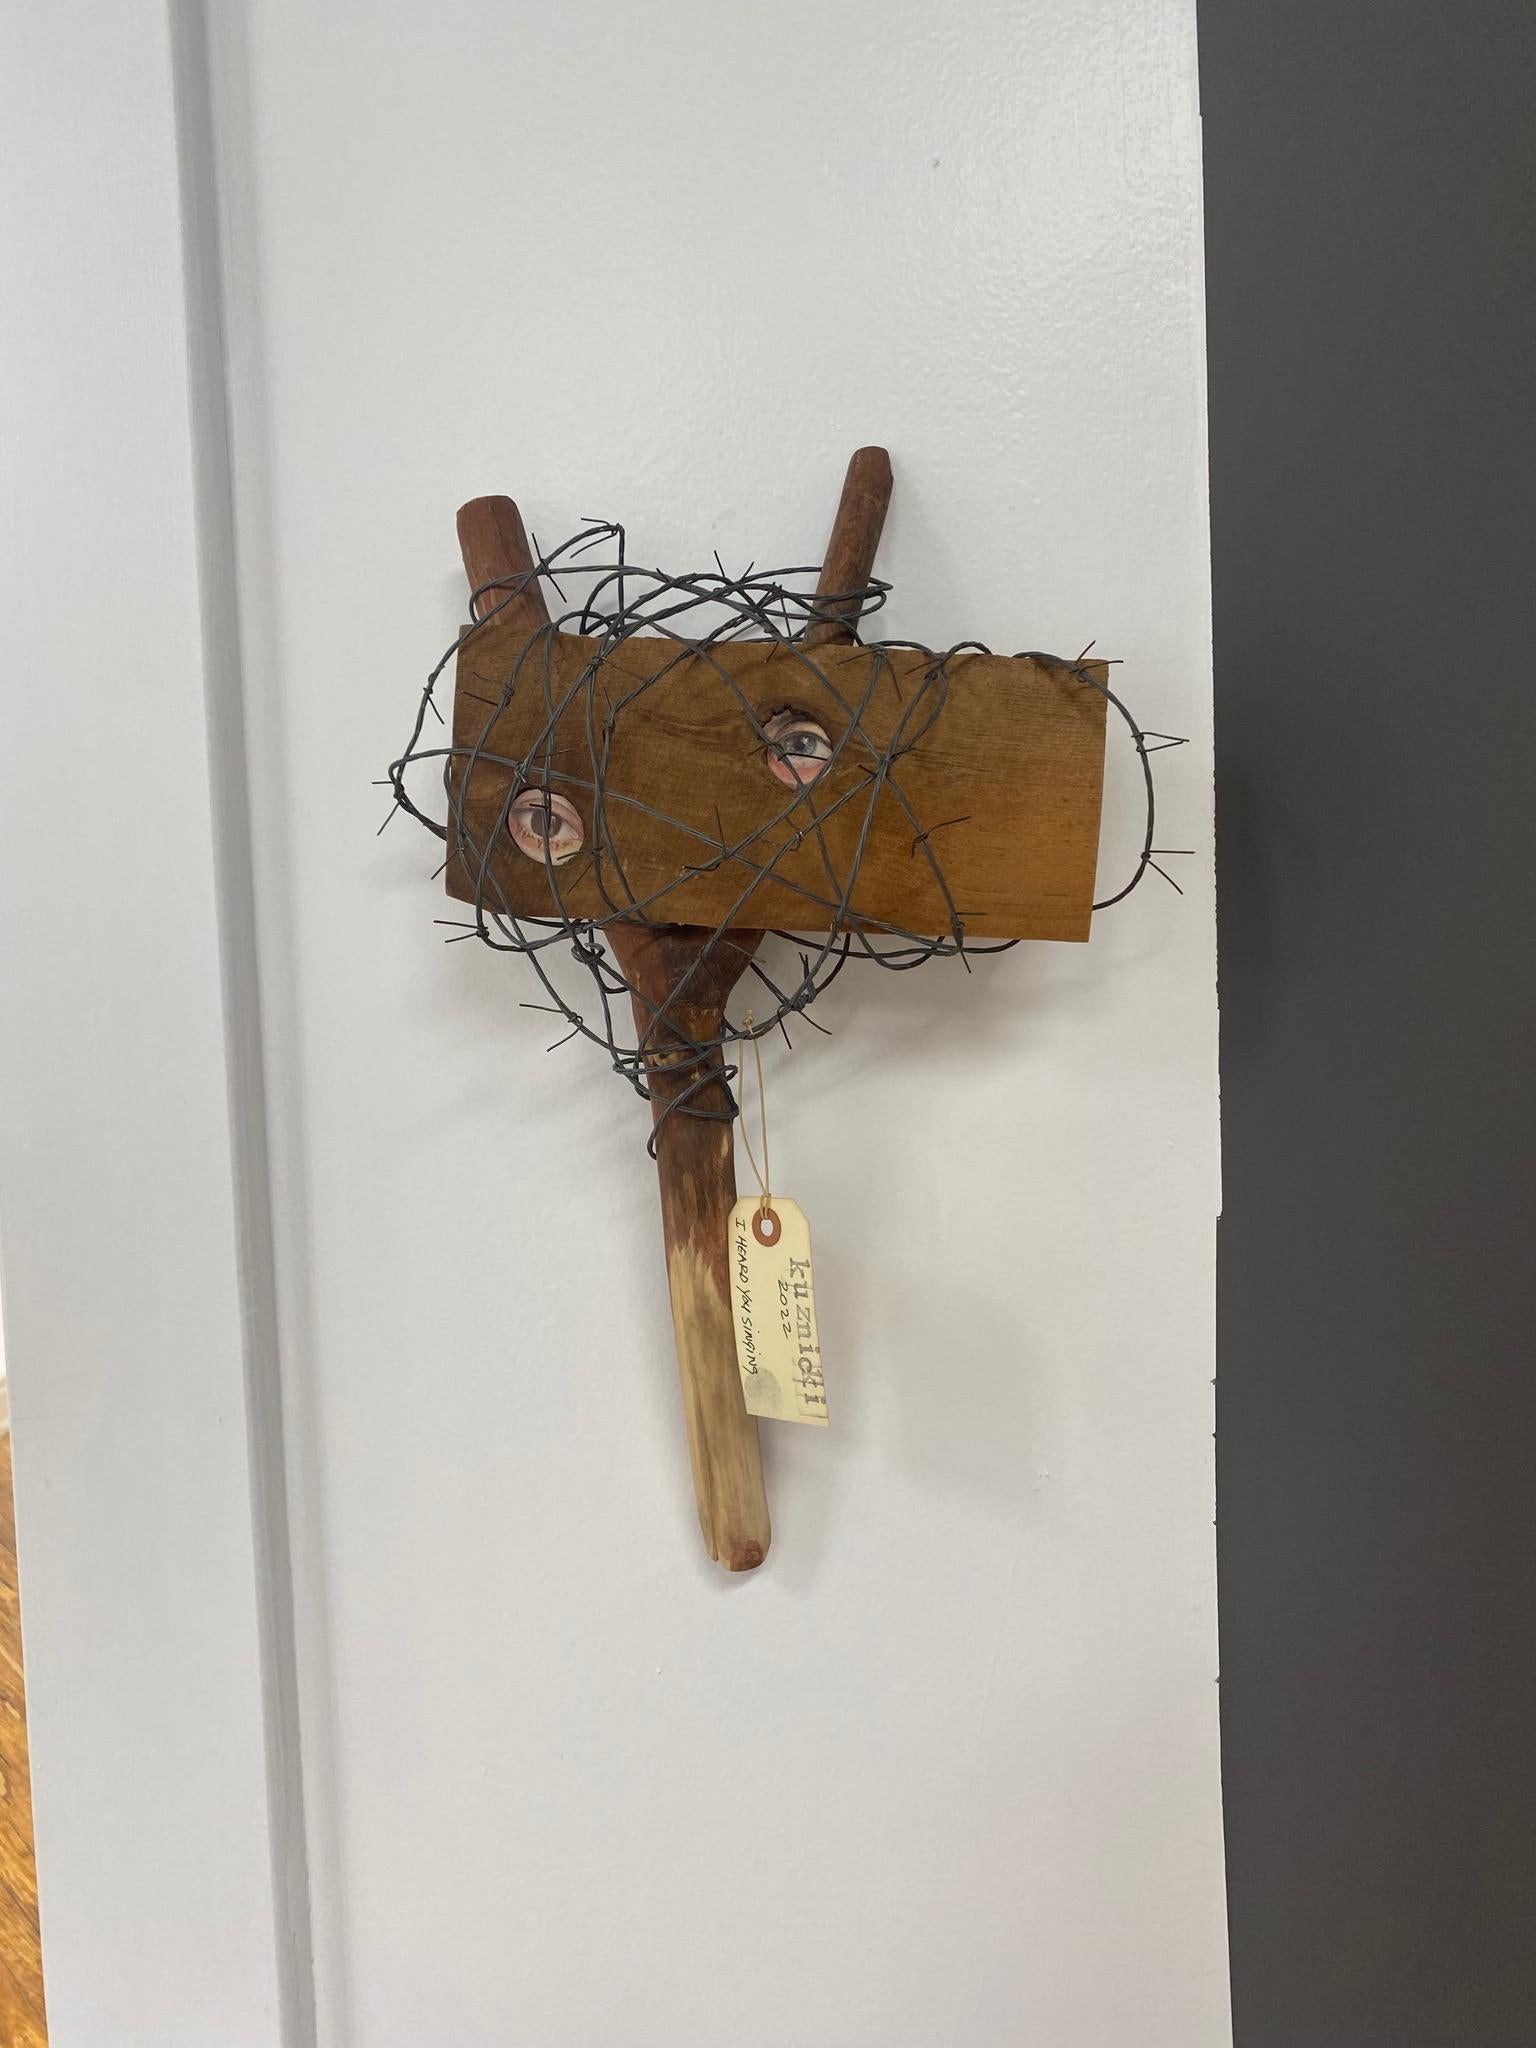 One of a kind mixed-media sculpture by Philip Kuznicki from the Spirit exhibition. Comes in its original frame. Born in Dunkirk NY, Kuznicki started his career working for artists such as Zaha Hadid and Ulysses Pagliari. His work is also a part of